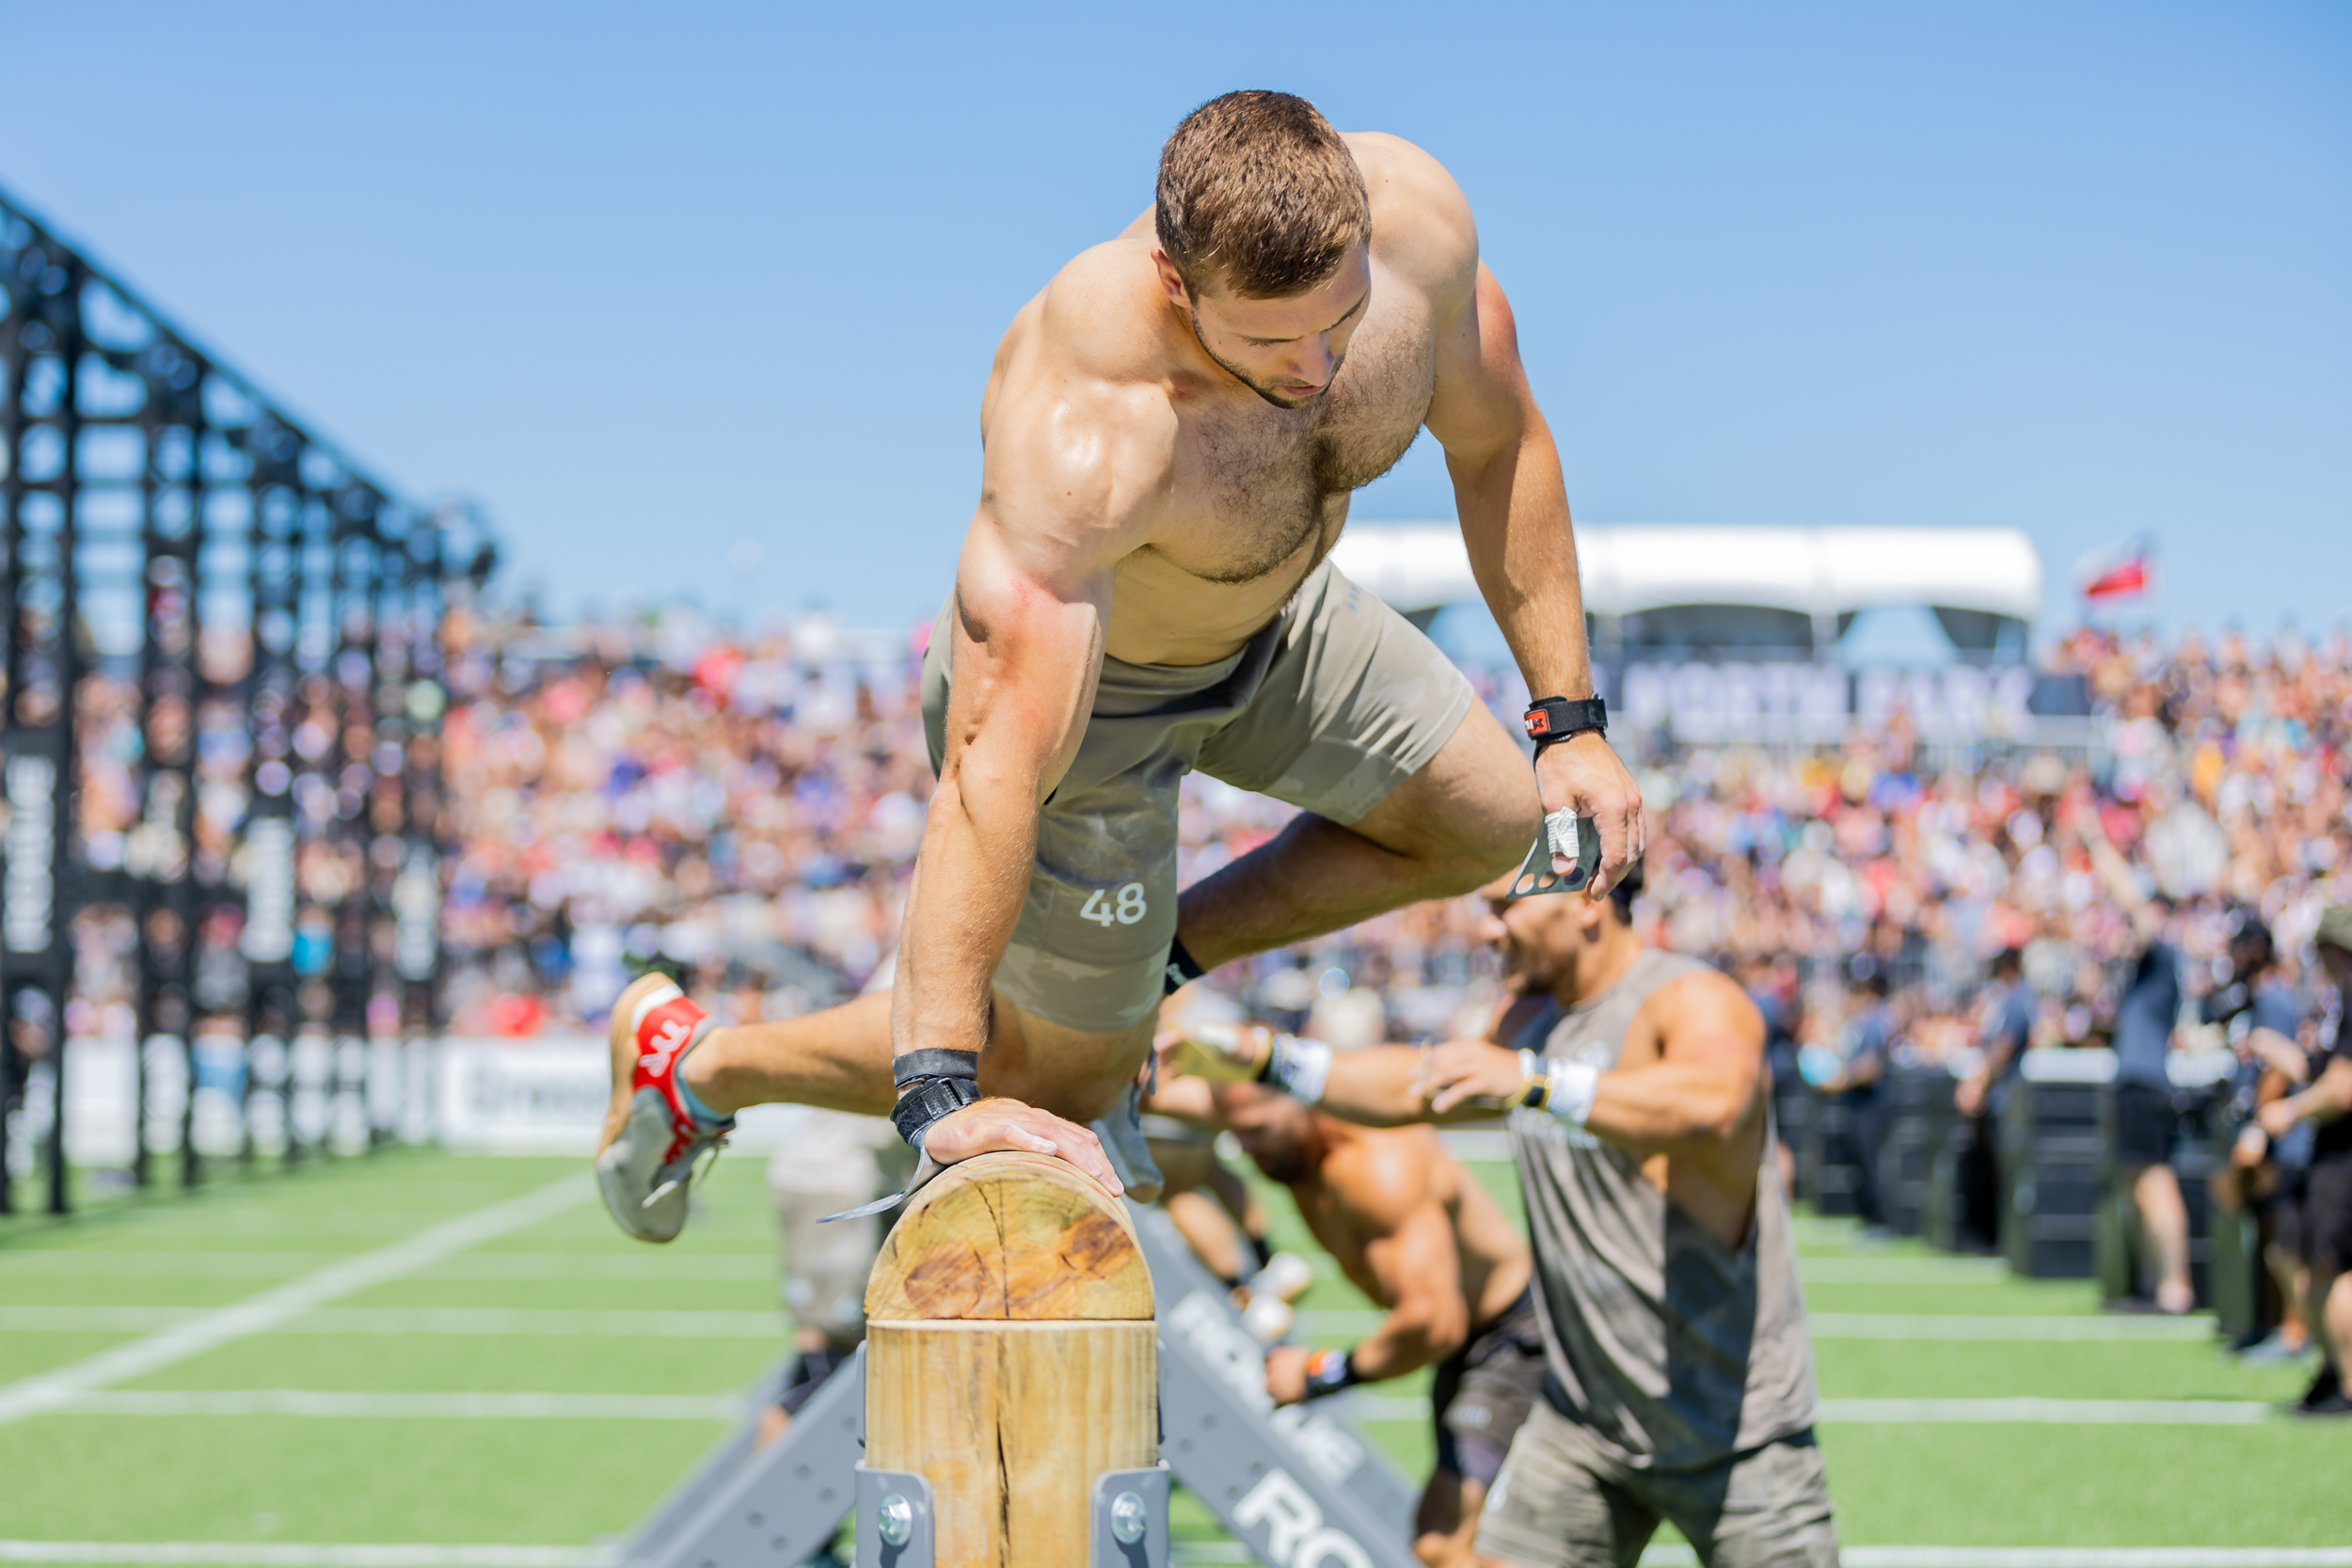 From Newbie to Pro: Navigate CrossFit Abbreviations with Confidence